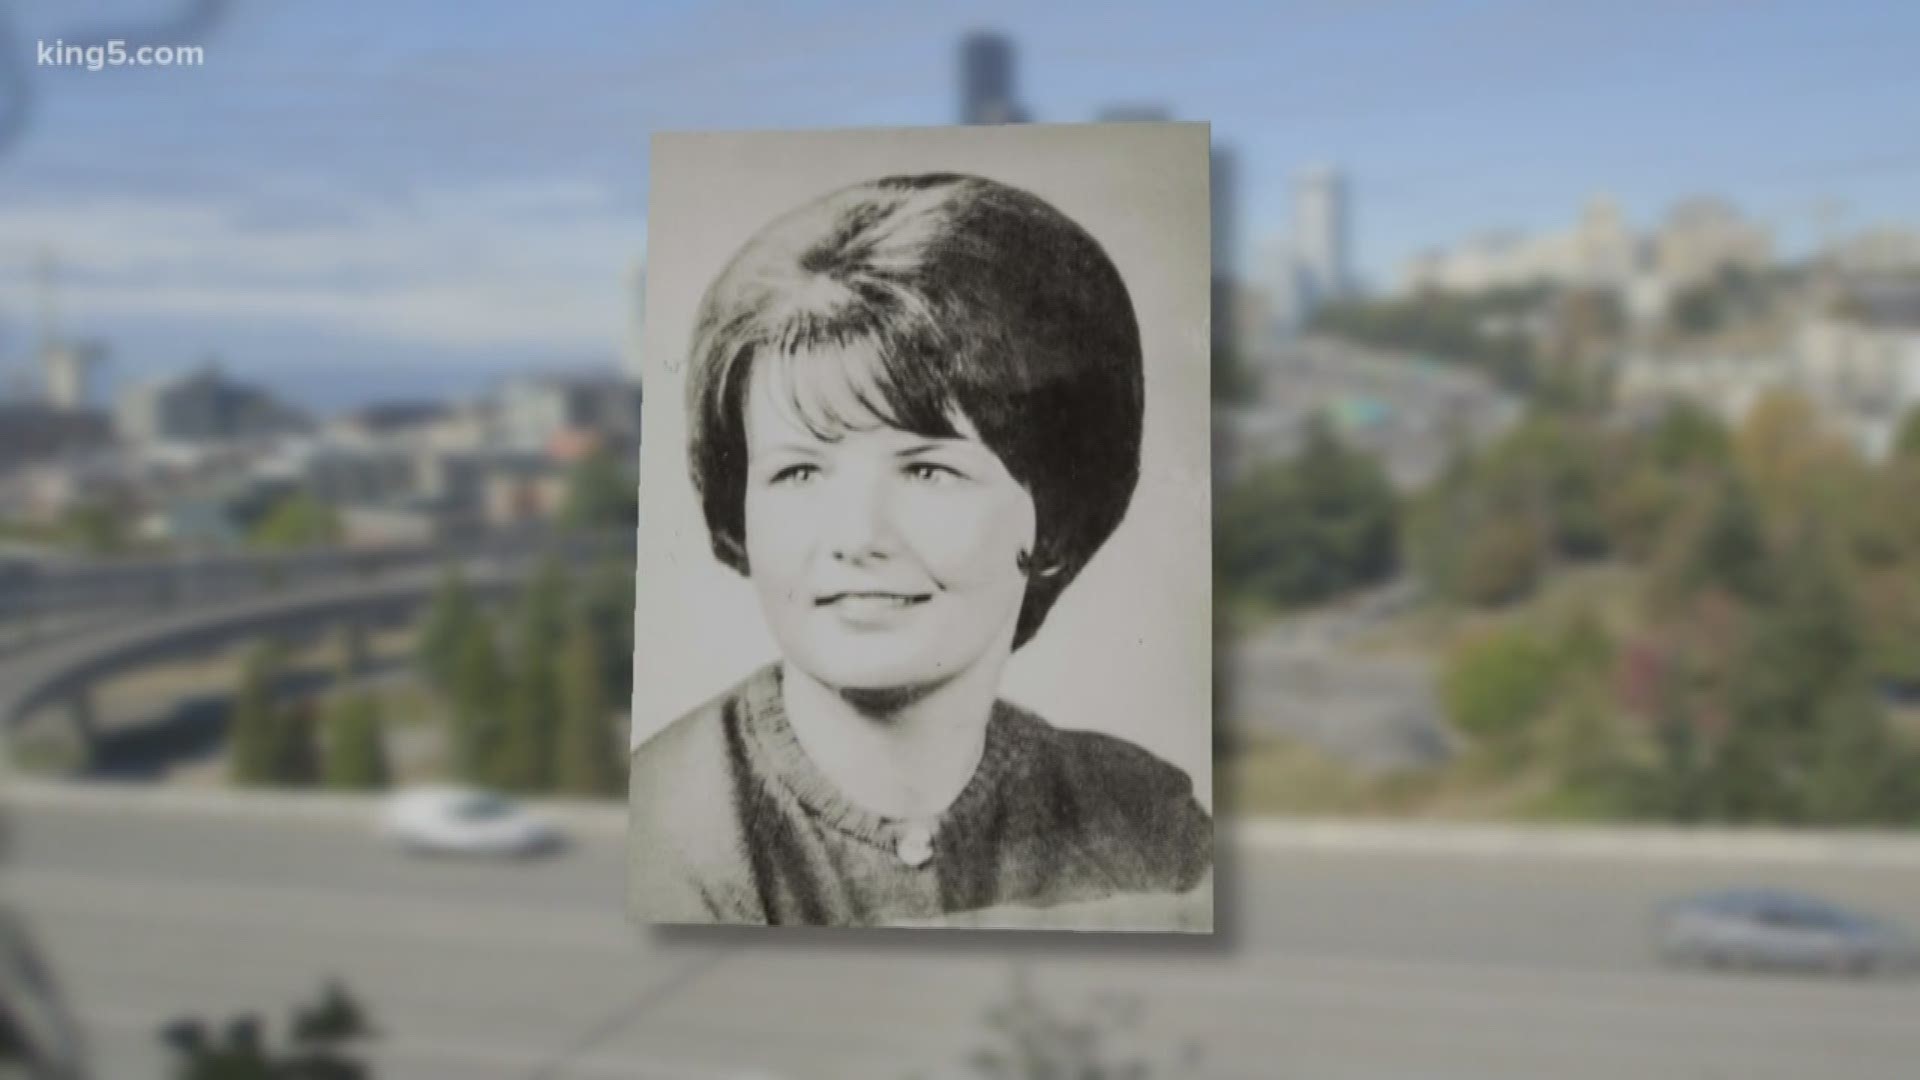 Seattle police are confident they've solved a cold case that spans half a century. DNA evidence did play a crucial role, but new type of police work gave investigators the lead they were missing all these years later. King 5's Sebastian Robertson shows us what this break means to the investigators and to the family who lost a young woman.